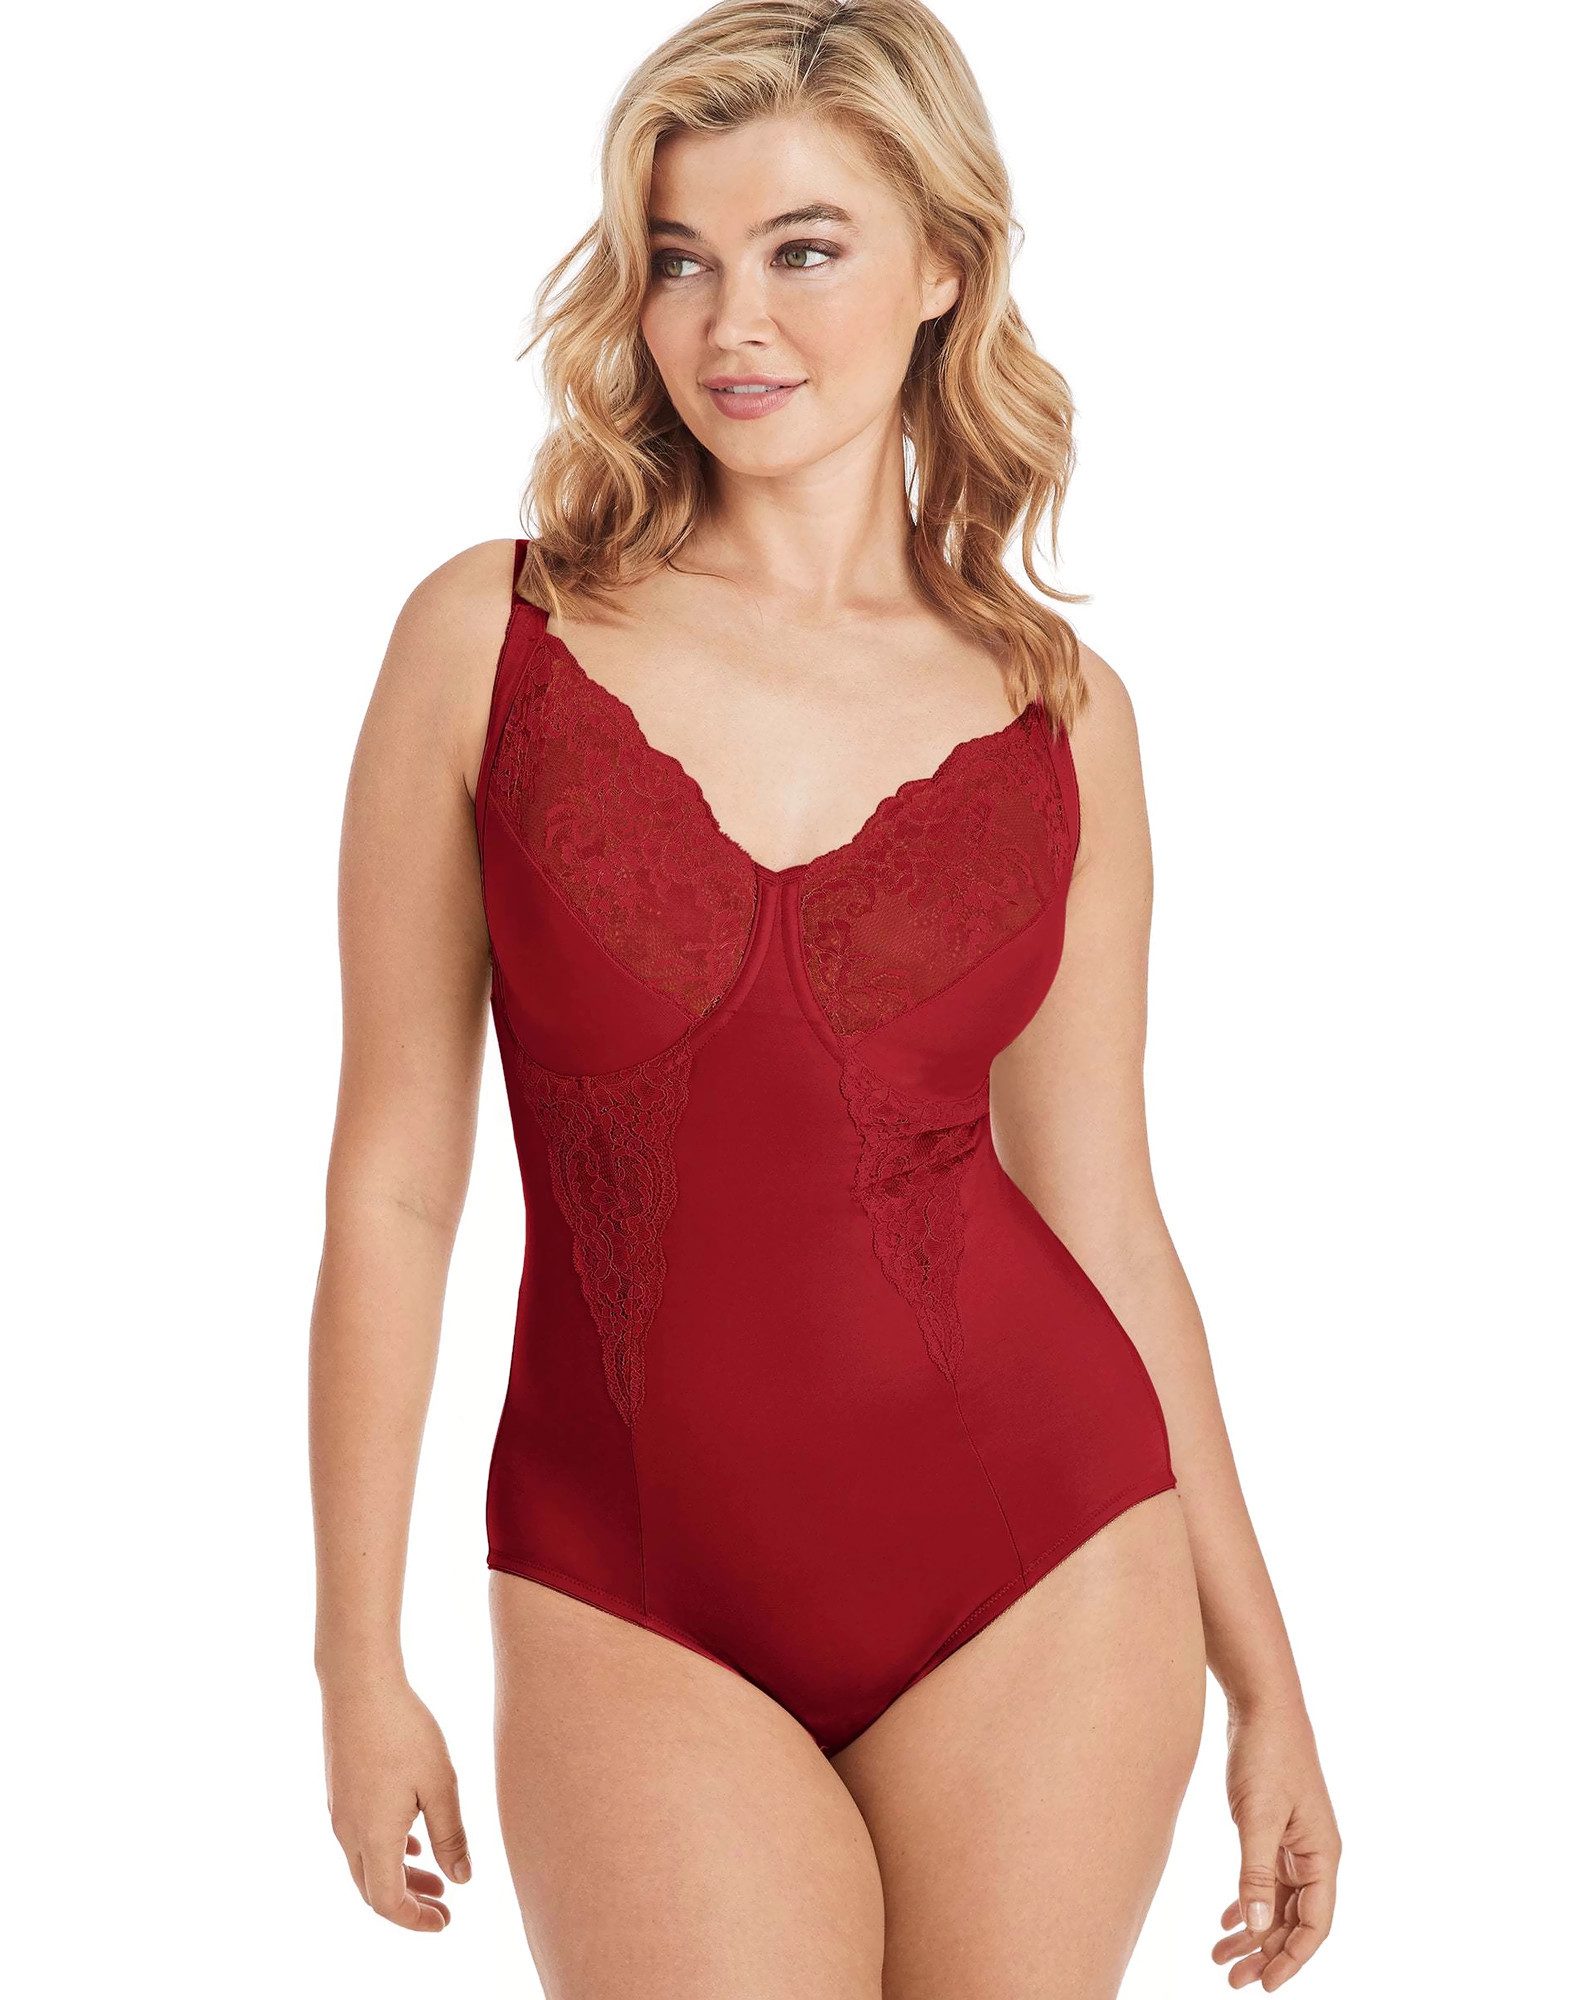 Buy Maidenform Women's Flexees Shapewear Body Briefer with Lace